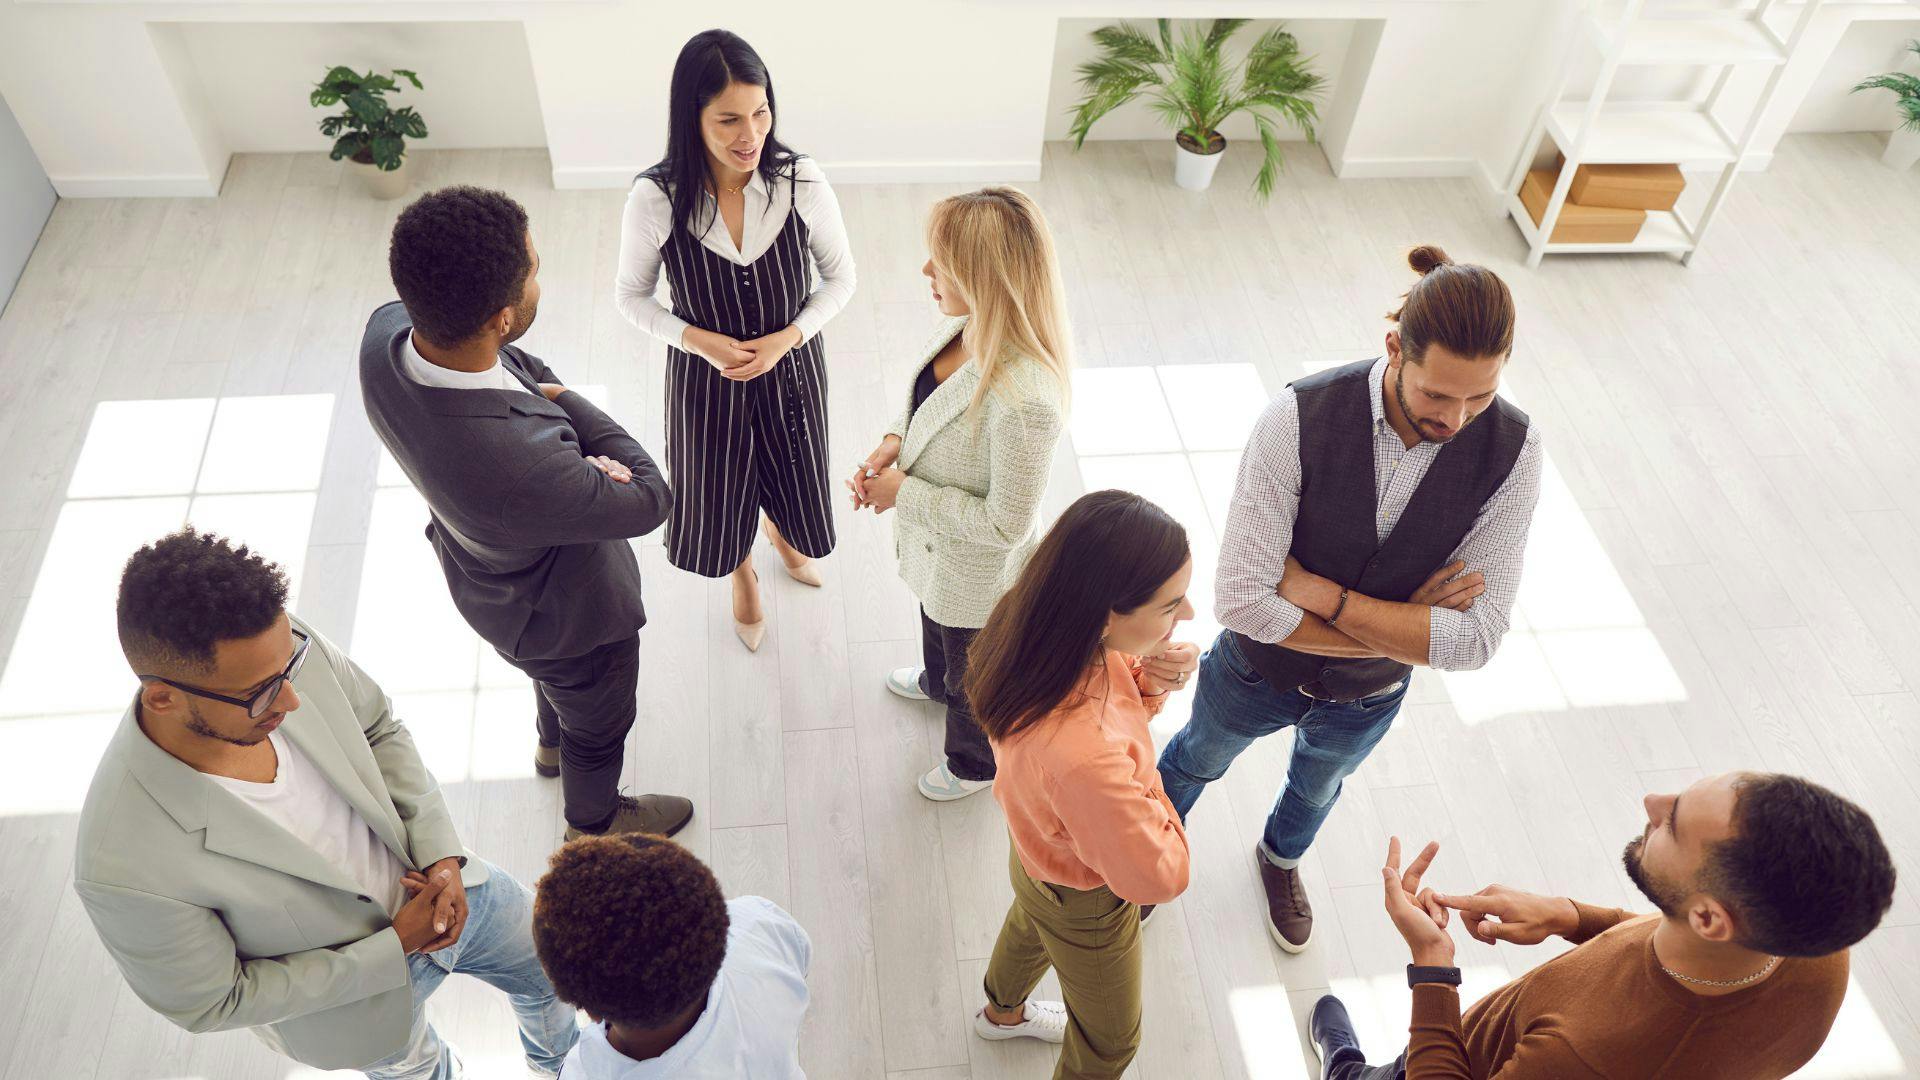 A diverse group of individuals forming a circle, engaged in a discussion or activity together.